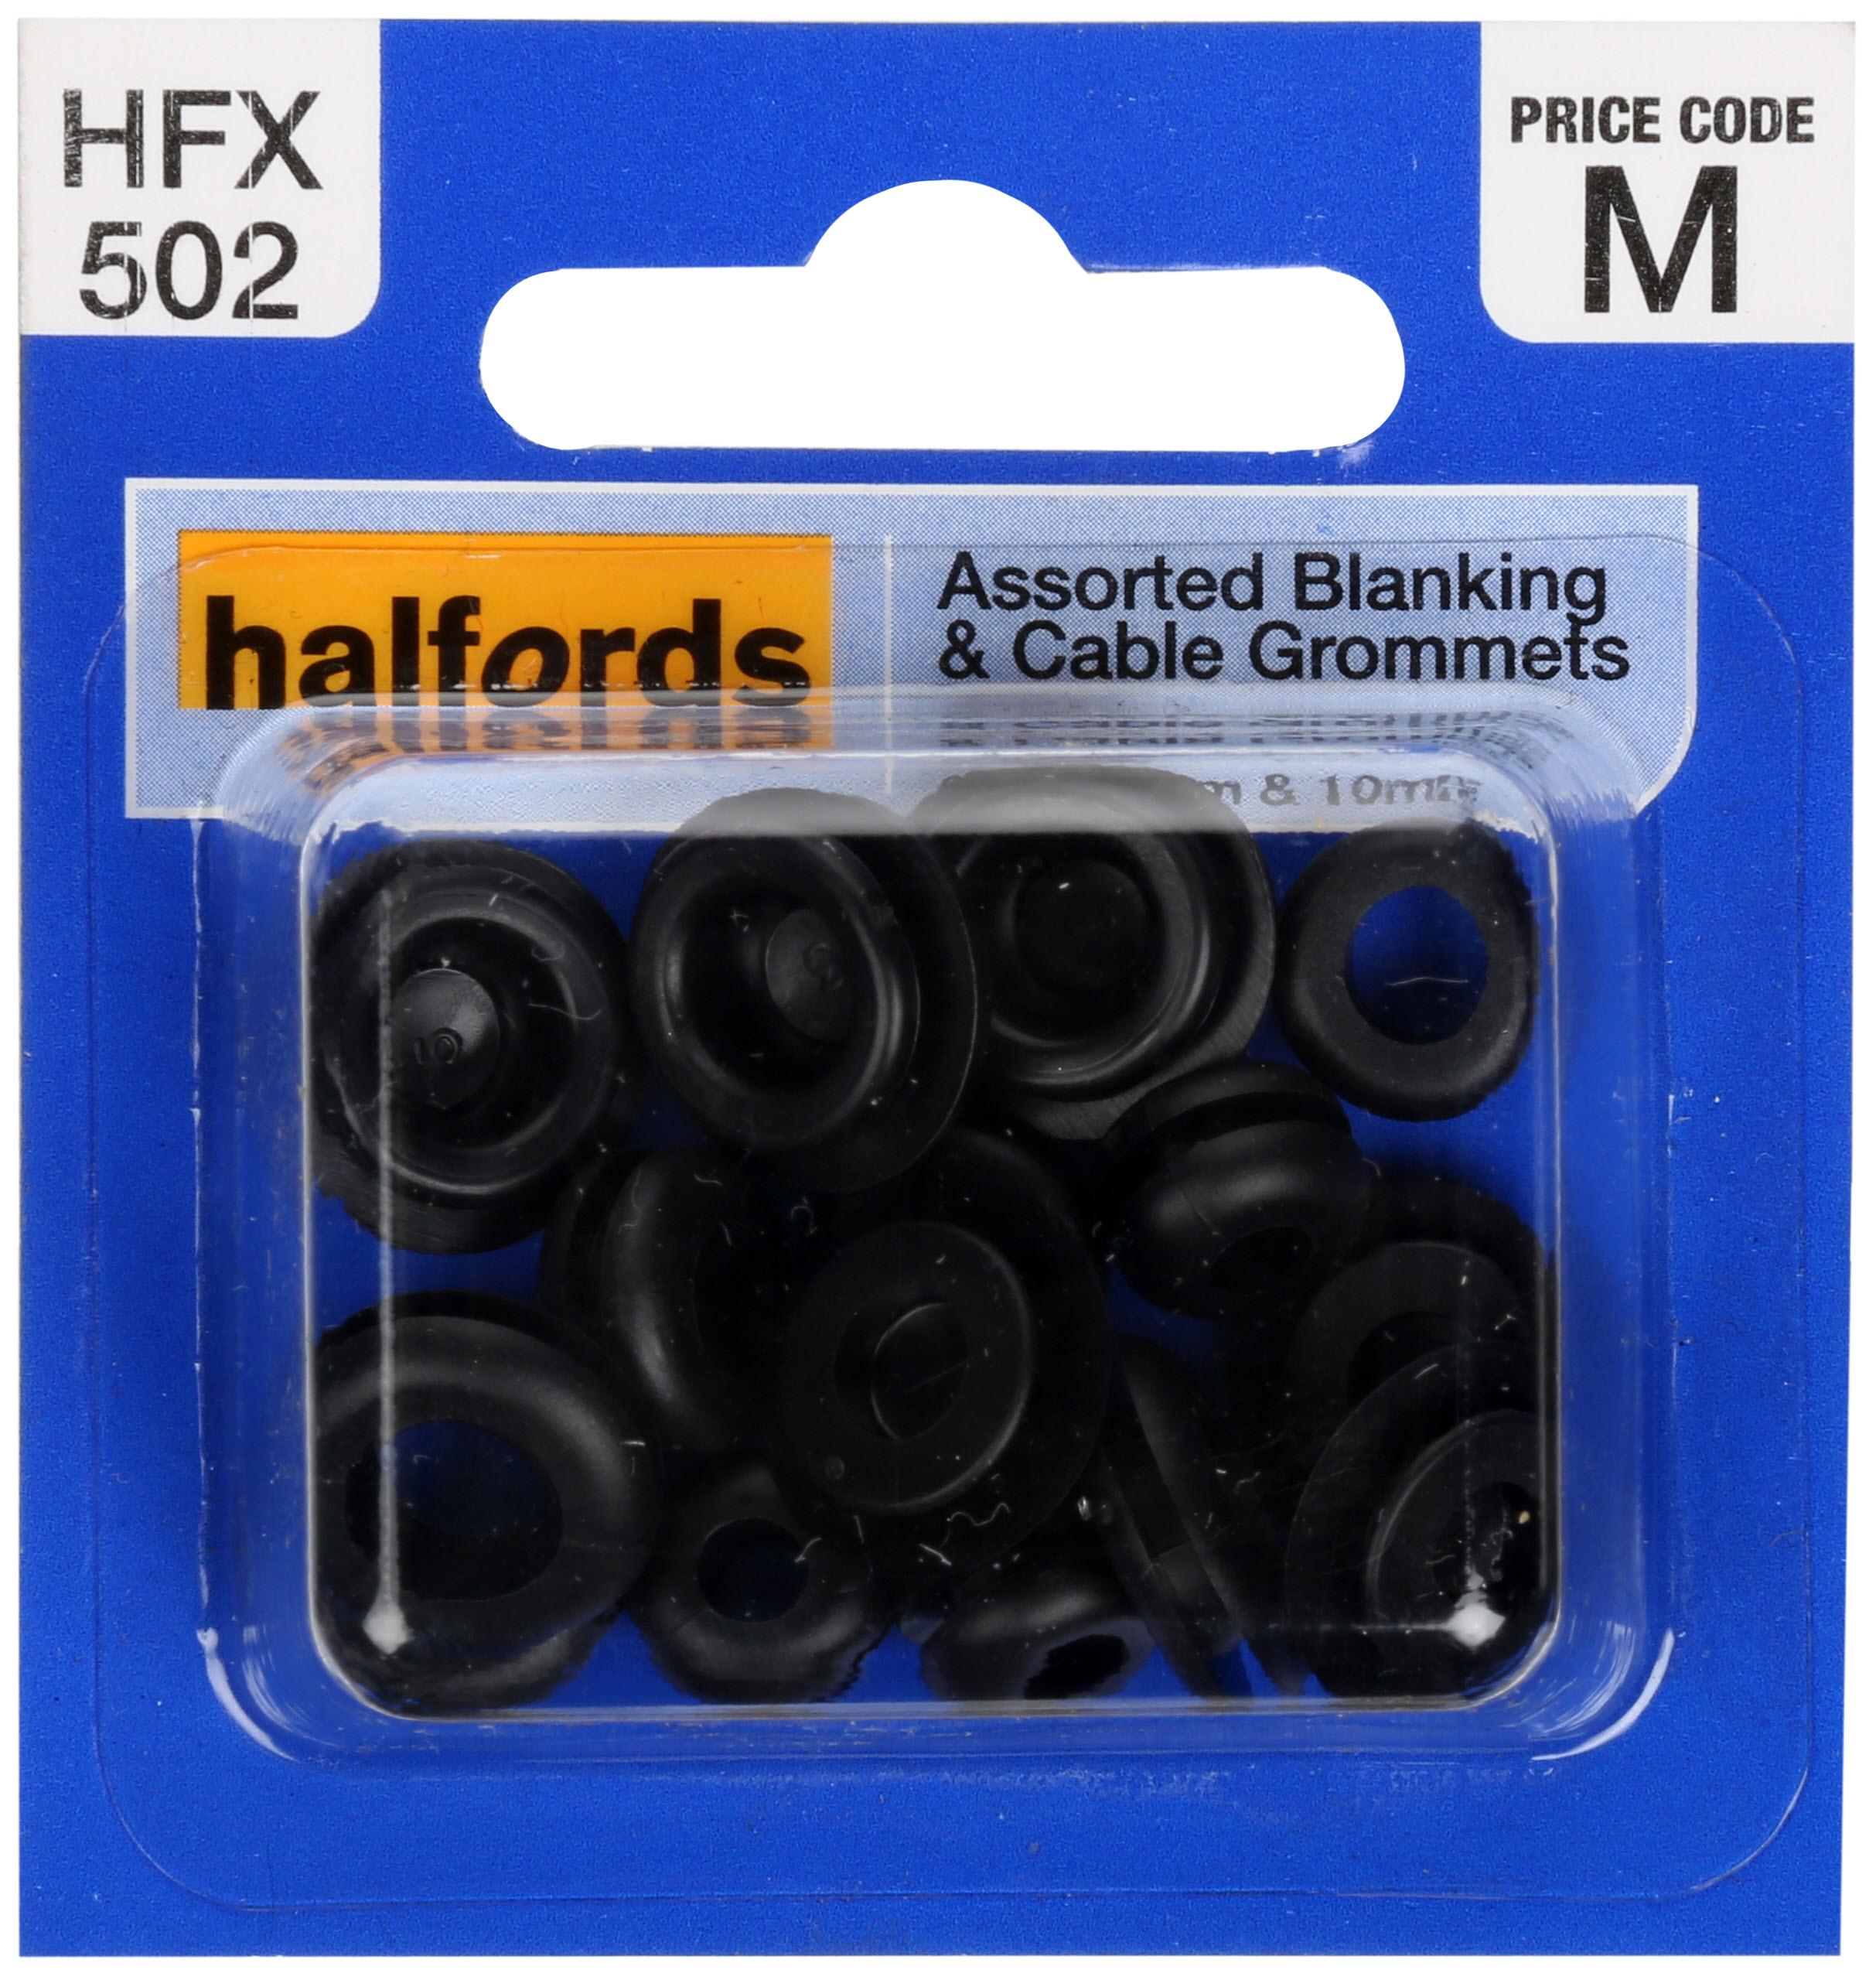 Halfords Assorted Blanking & Cable Grommets (Hfx502)